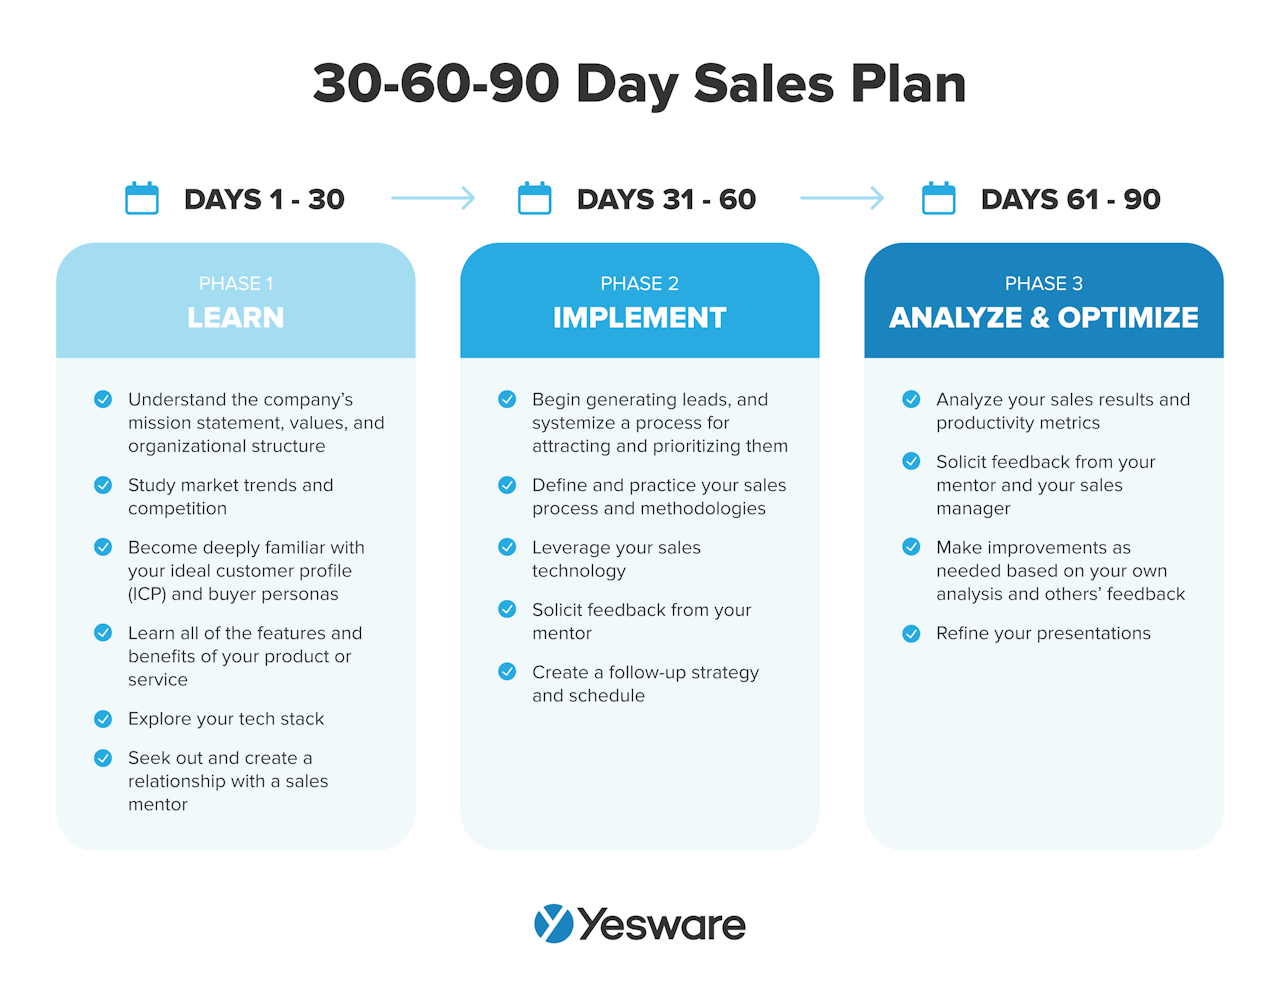 Strategic Sales Plans Examples: 30-60-90 day sales plan